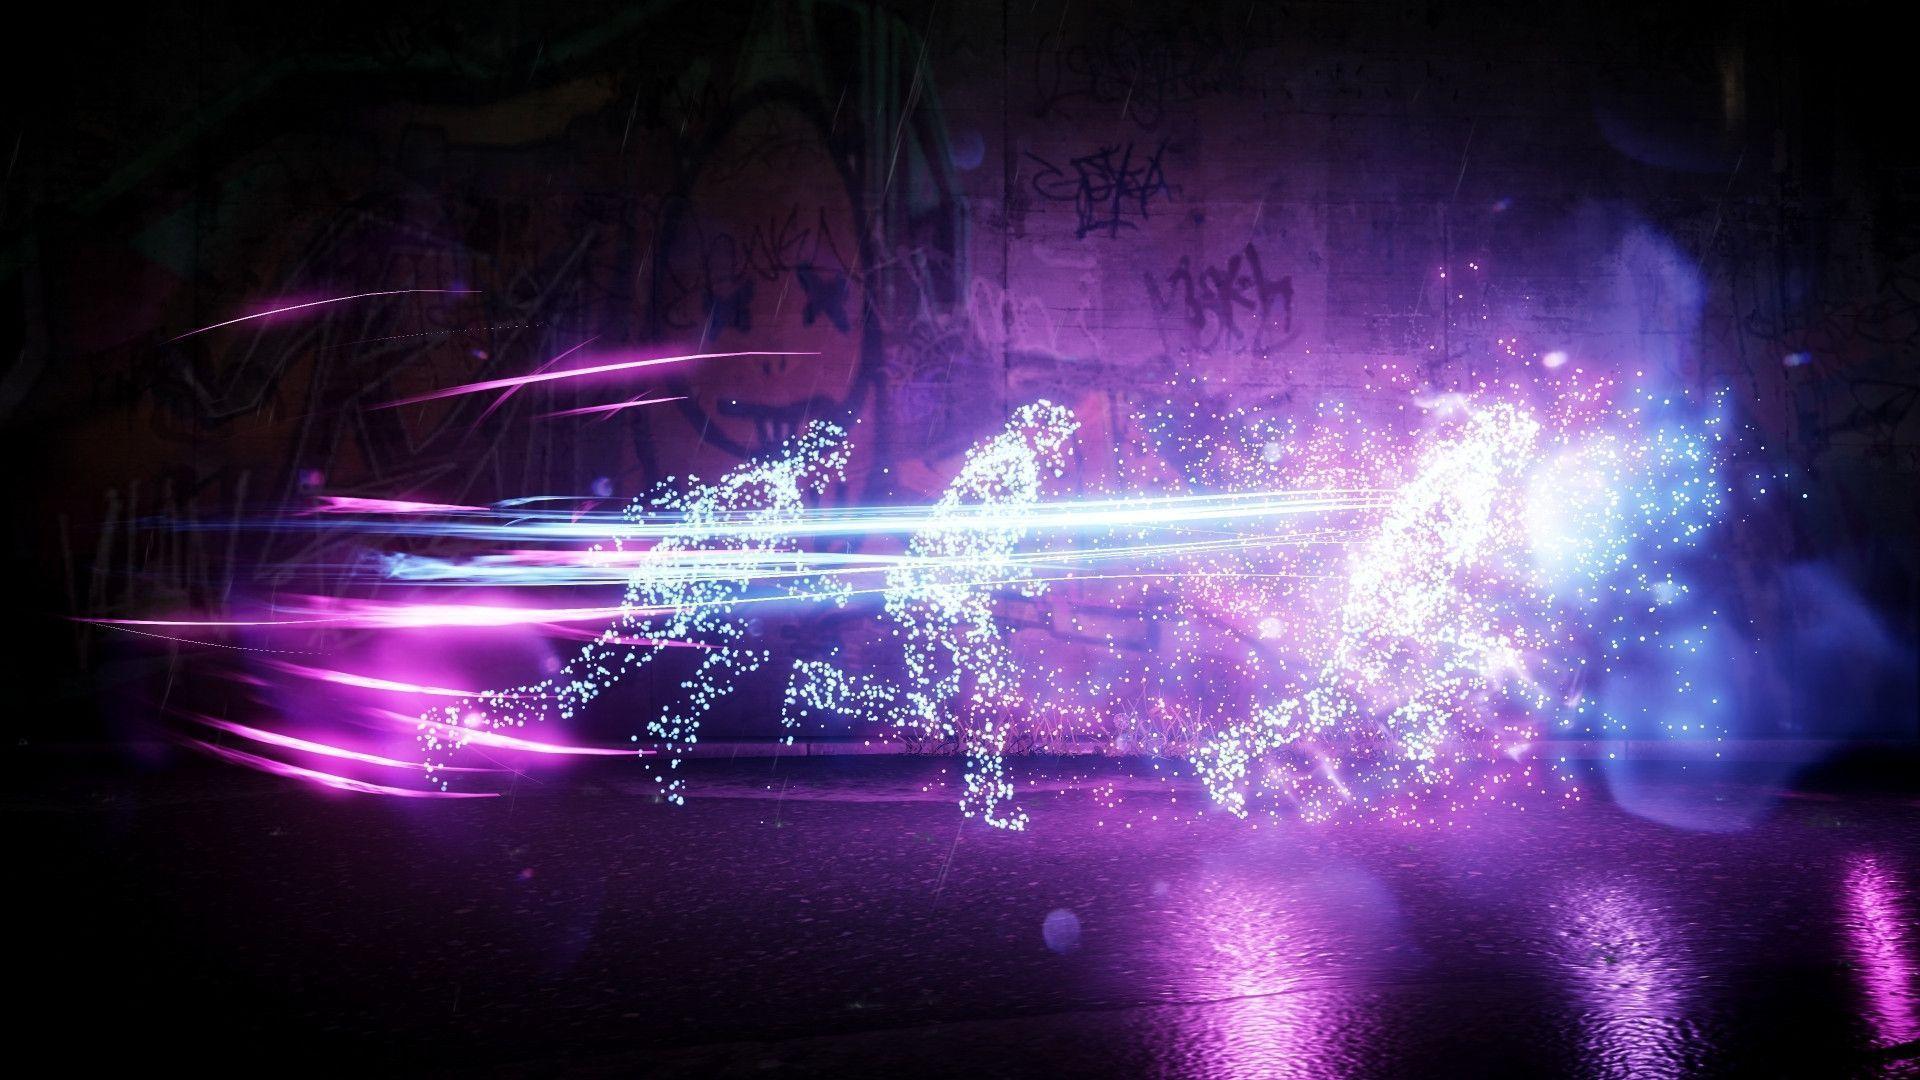 Infamous Second Son Wallpaper Son Delsin And Desktop Background In